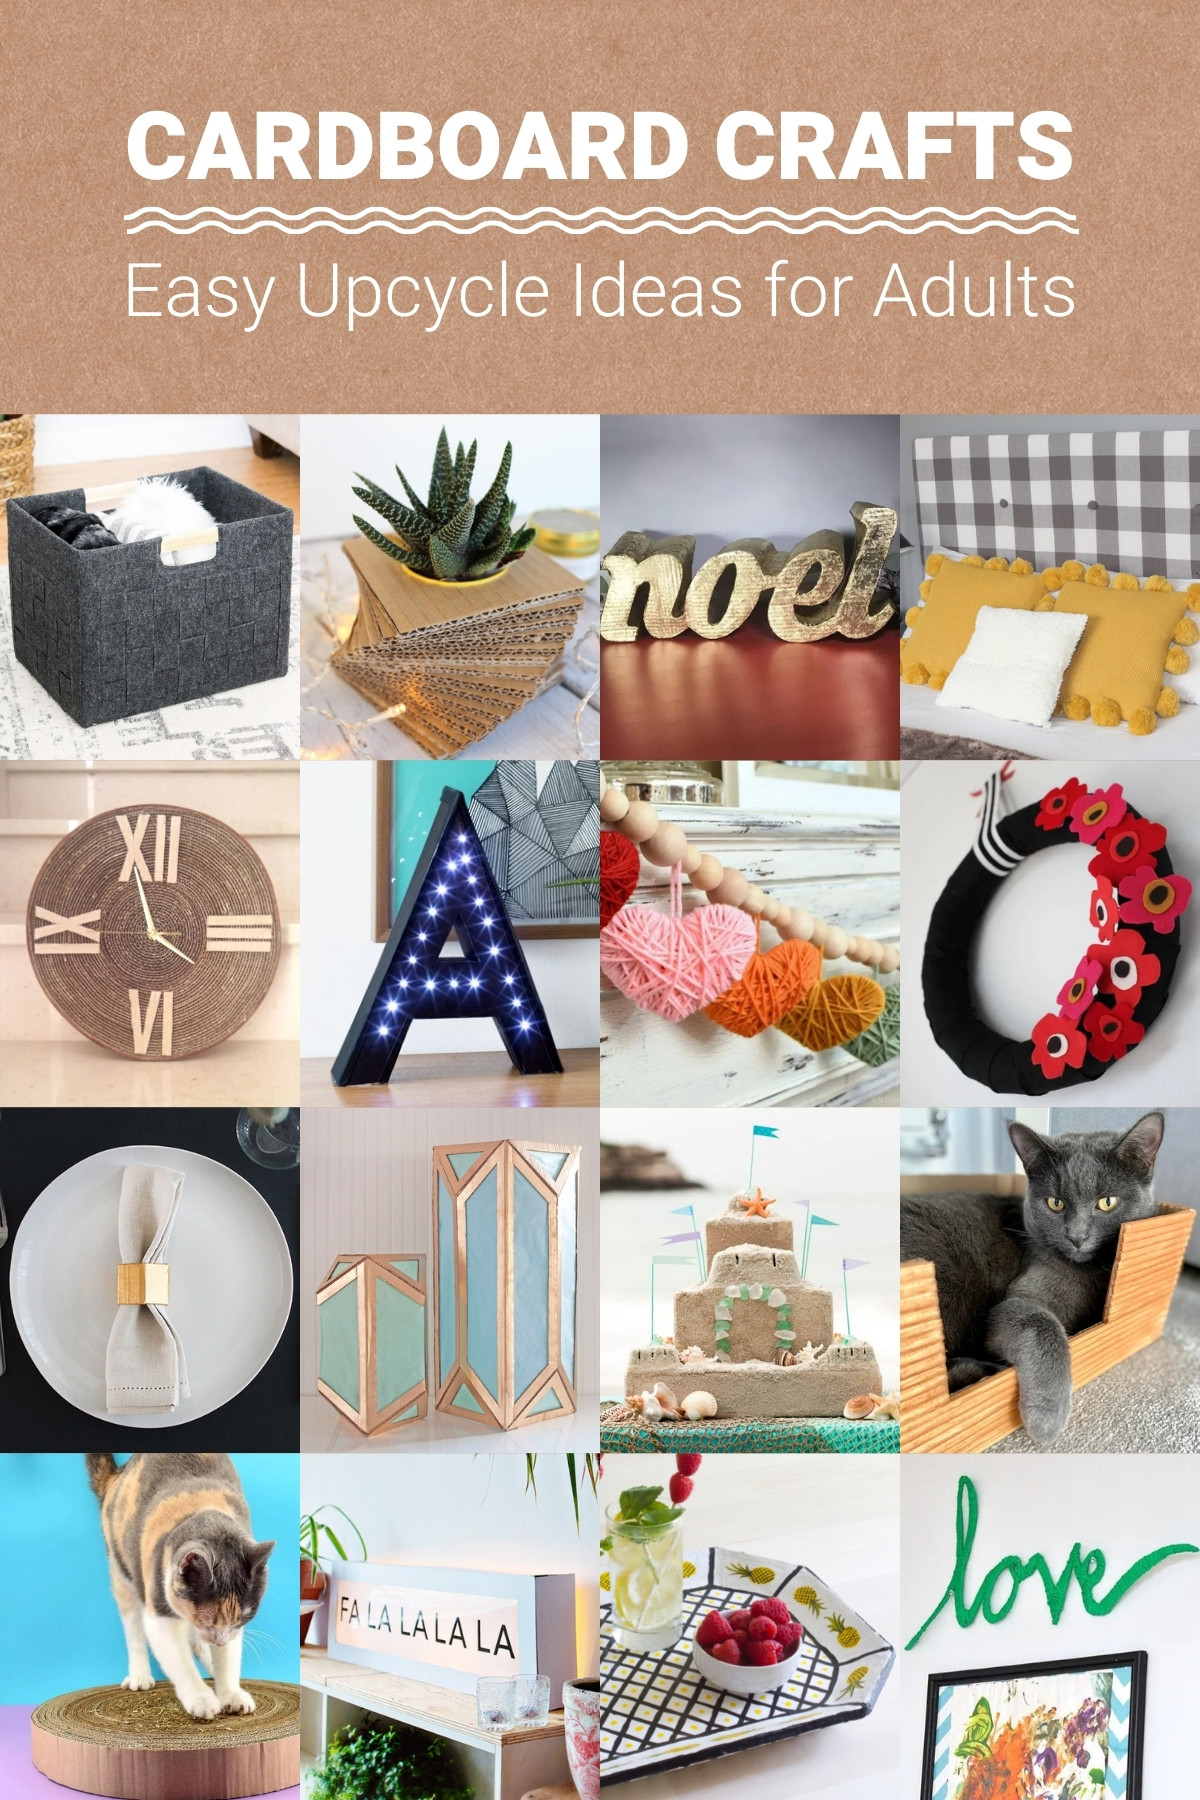 25 cardboard crafts easy upcycle ideas for adults